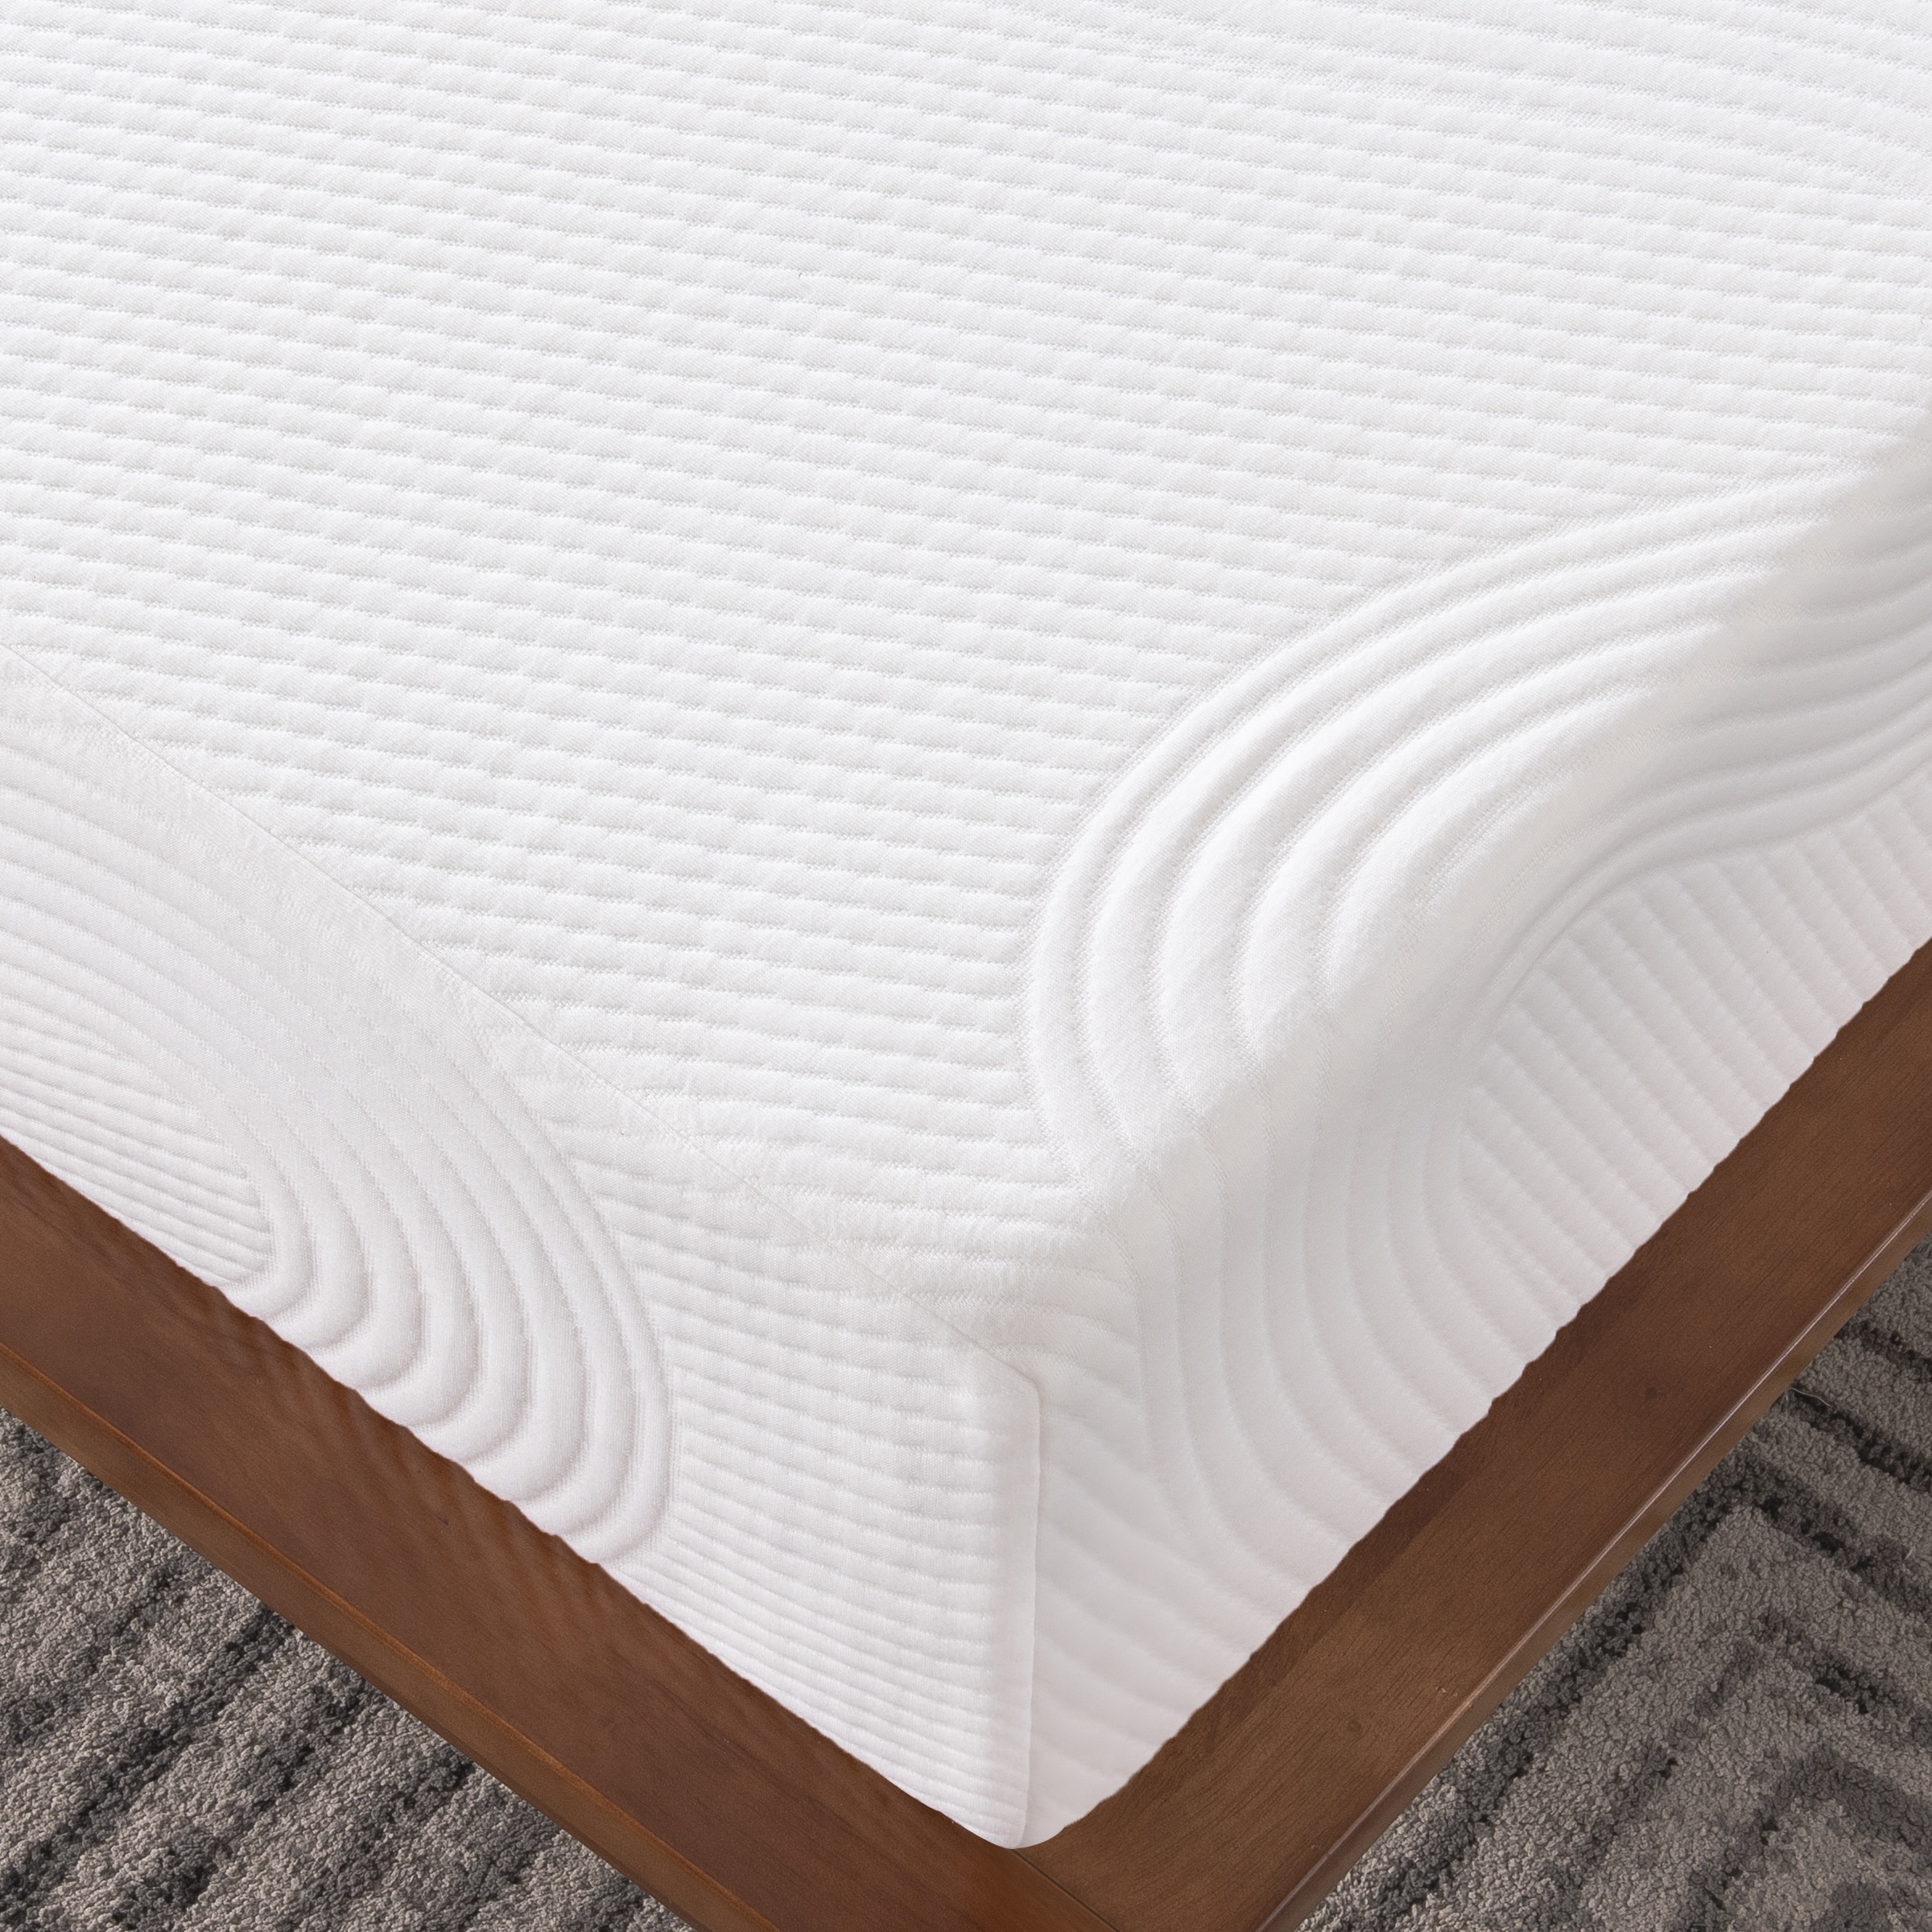 Hastings Home Toddler Bed Bumper - Kids Safety Sleep Guard Foam Mattress  Barrier Cushion - Soft Polyester - Waterproof - Machine Washable - White in  the Bed Pillows department at